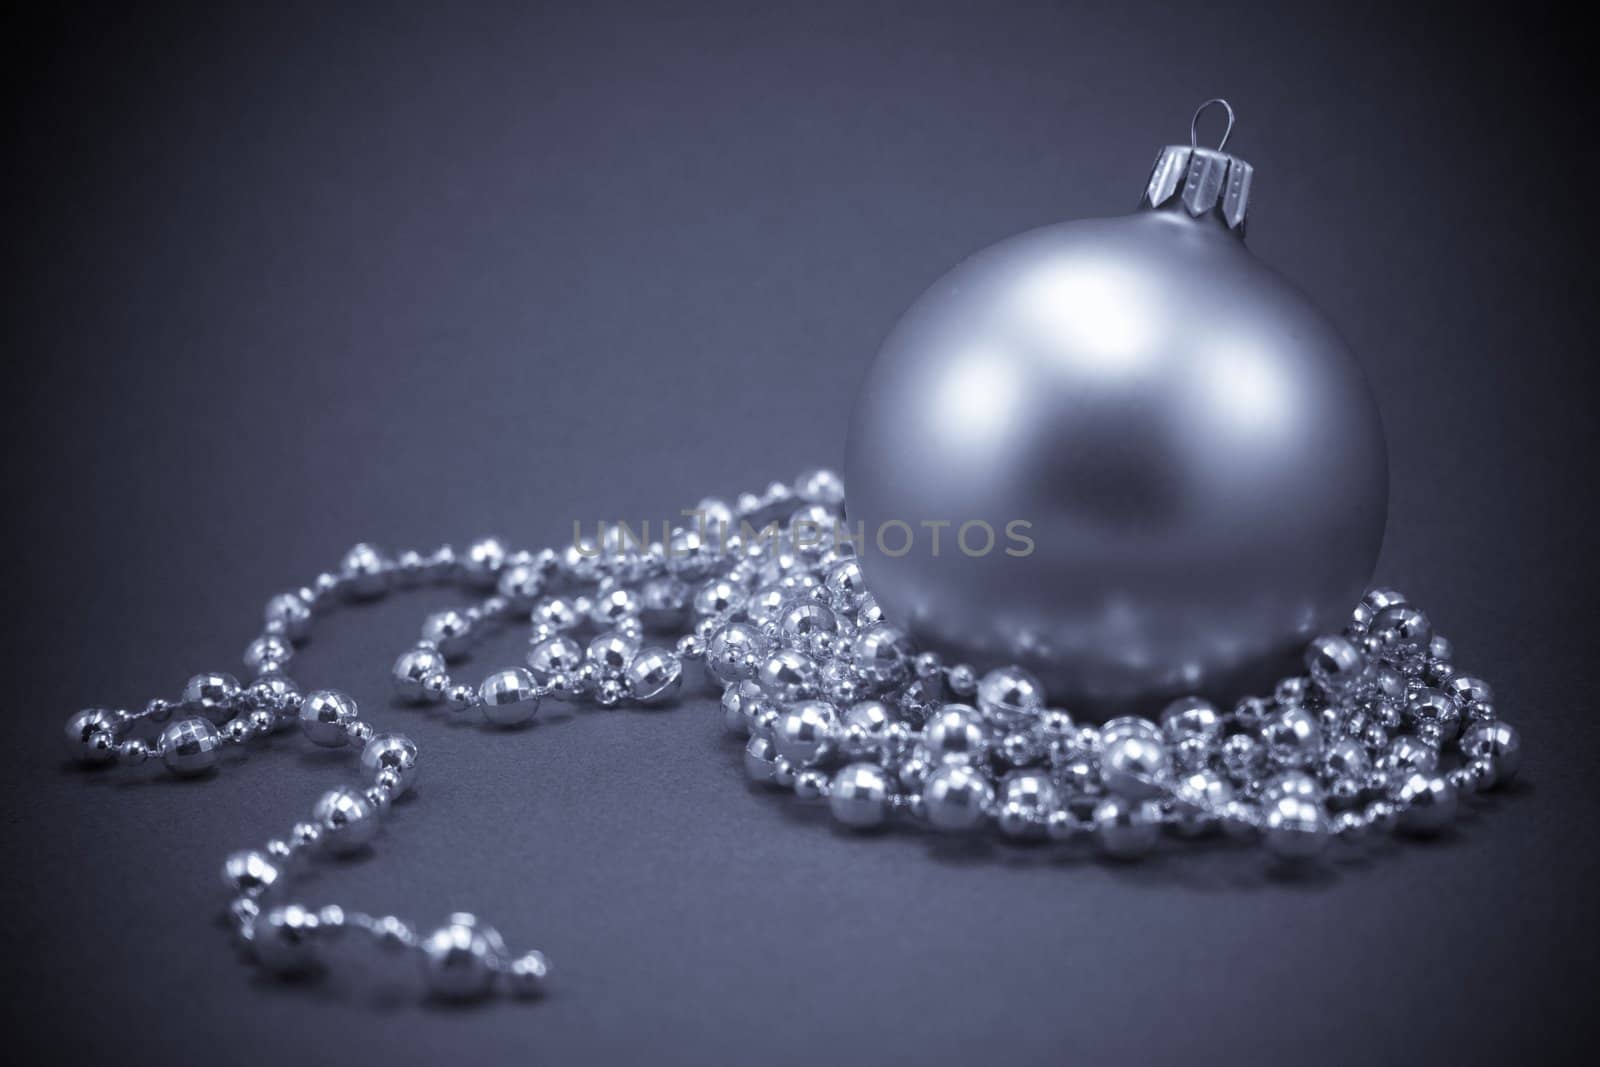 Christmas ball by timscottrom